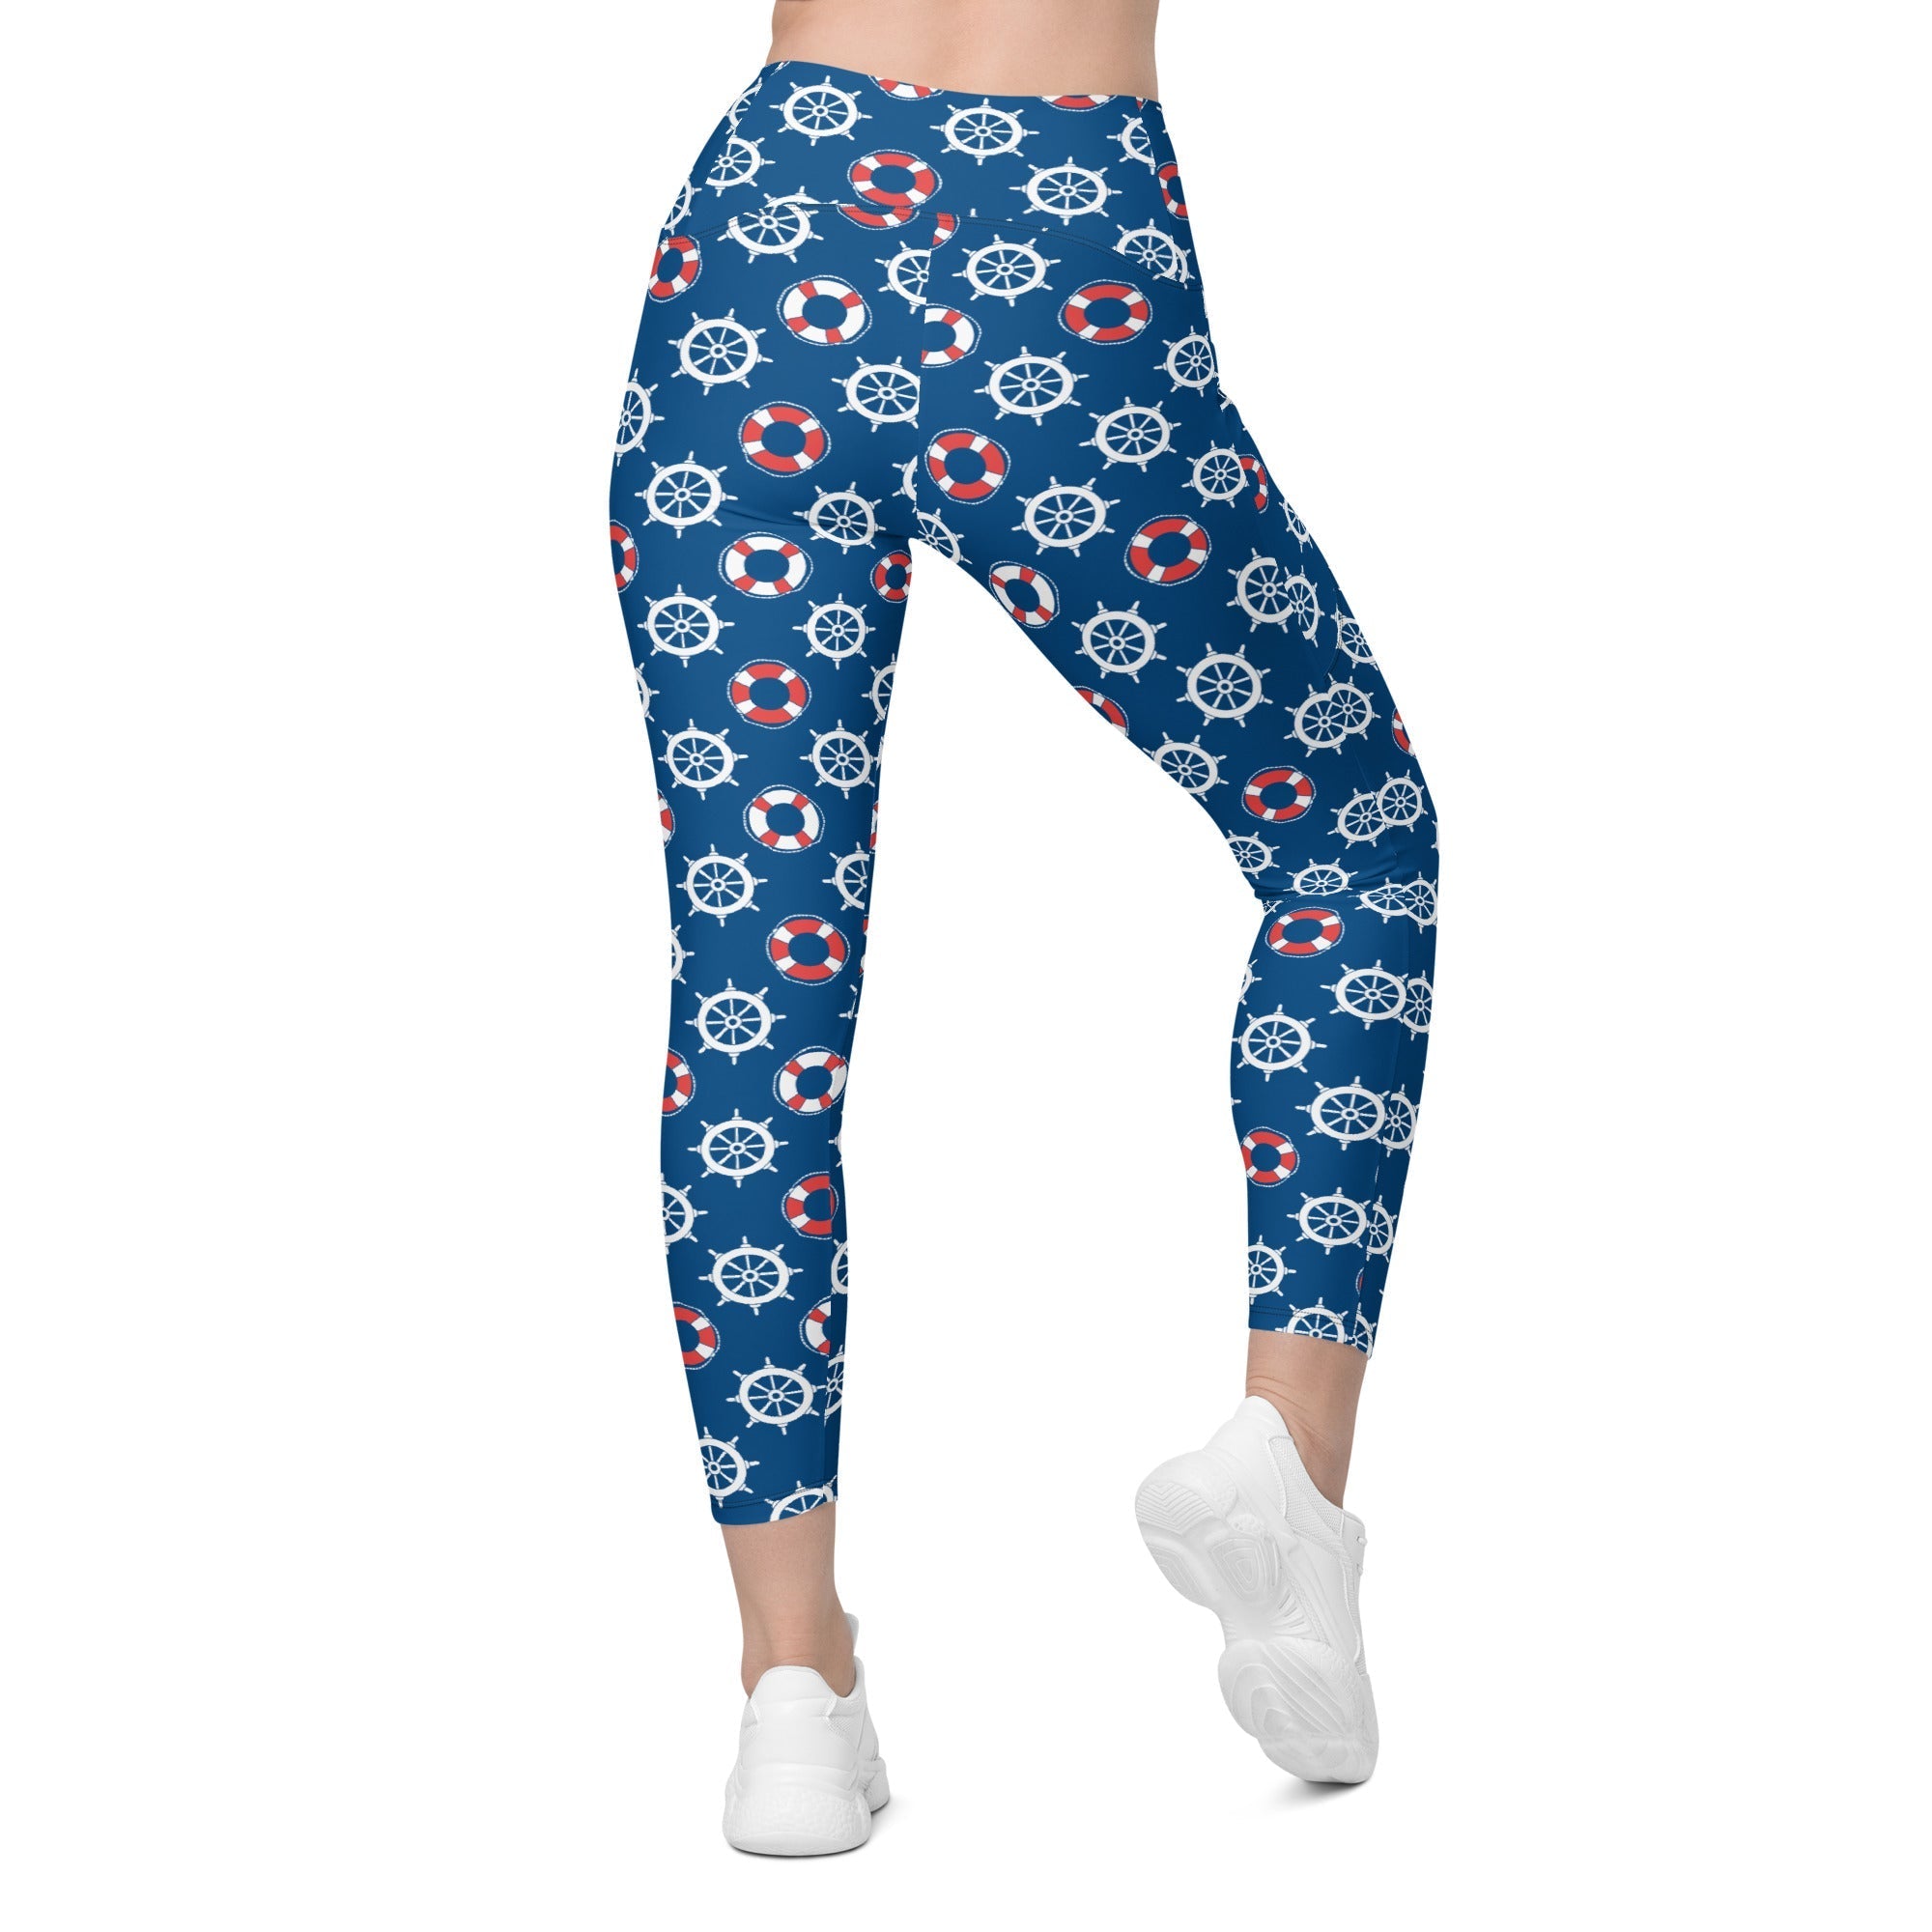 Nautical Leggings With Pockets